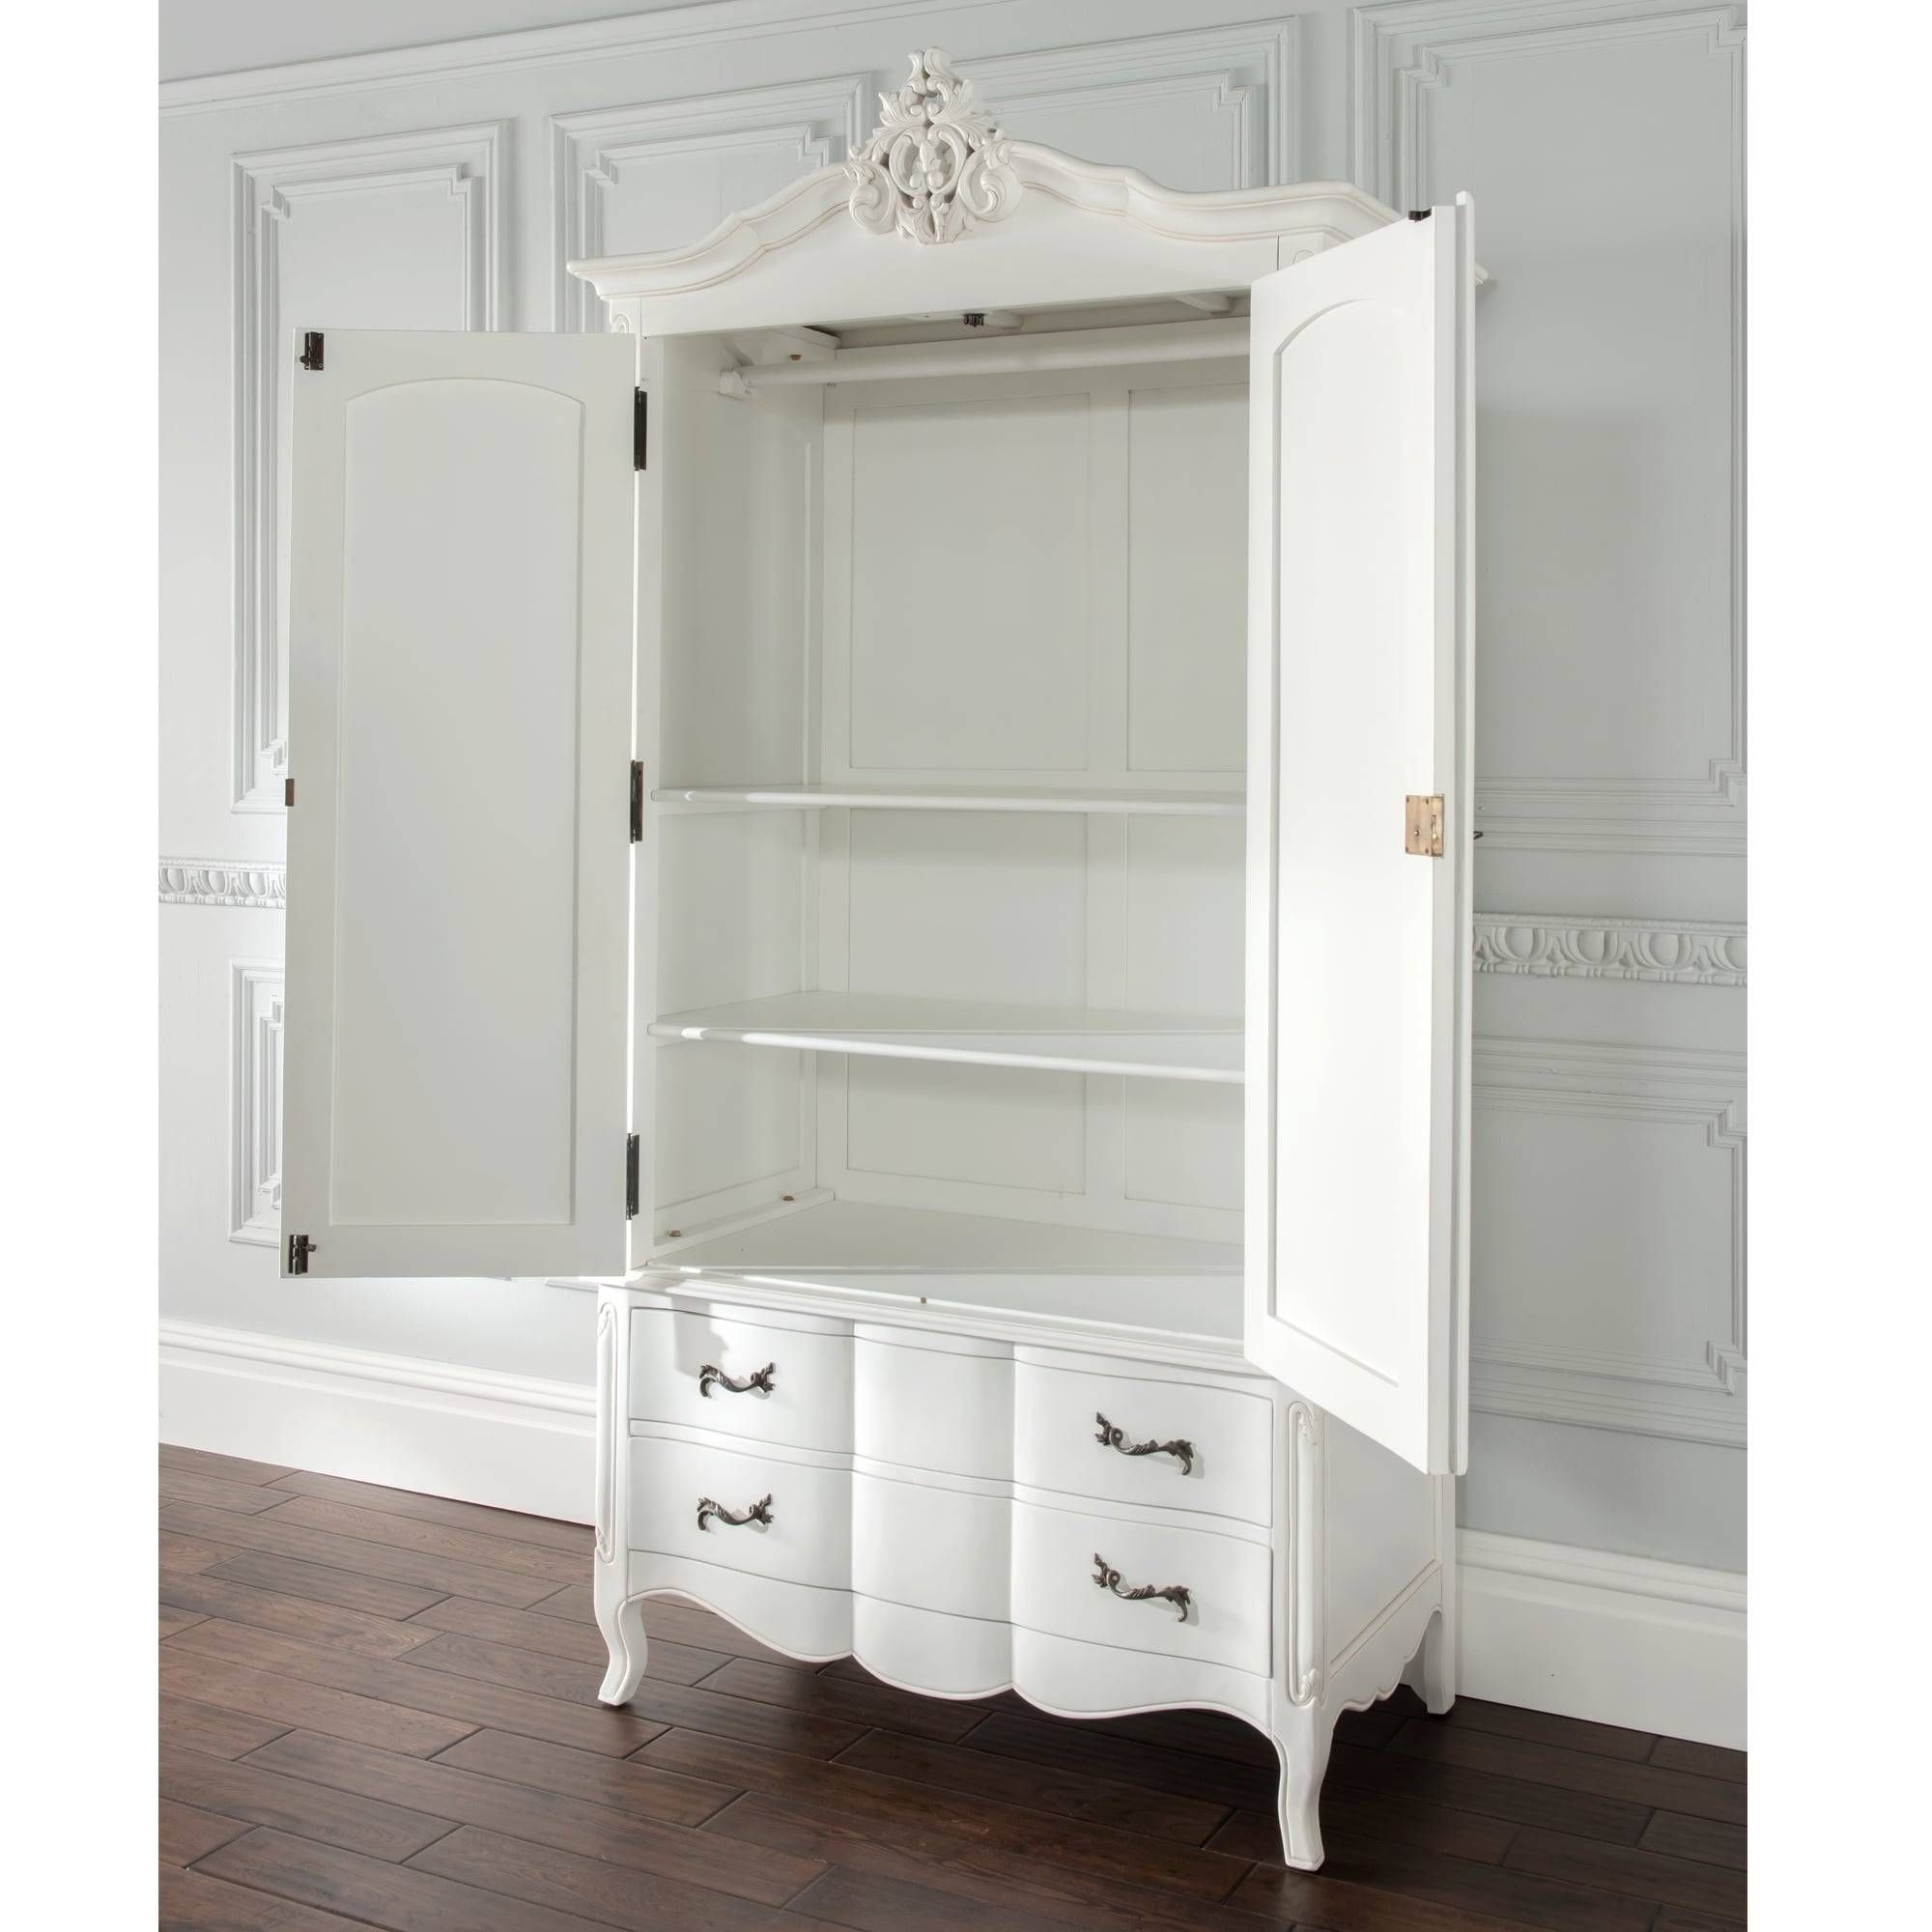 Estelle Antique French Style Wardrobe | French Style Furniture With Regard To French Style White Wardrobes (View 10 of 15)